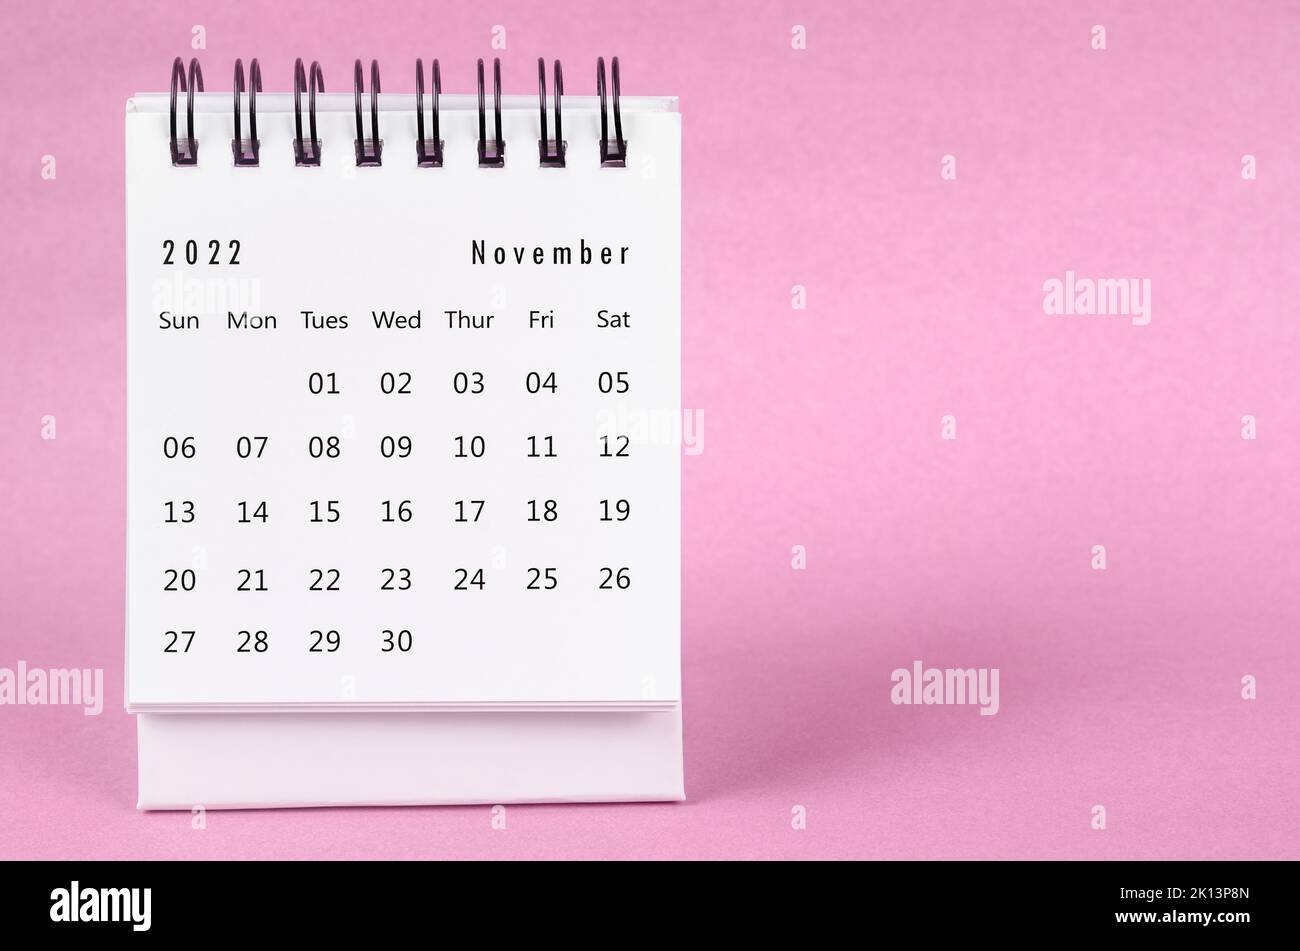 November 2022 Monthly desk calendar for 2022 year on pink background. Stock Photo